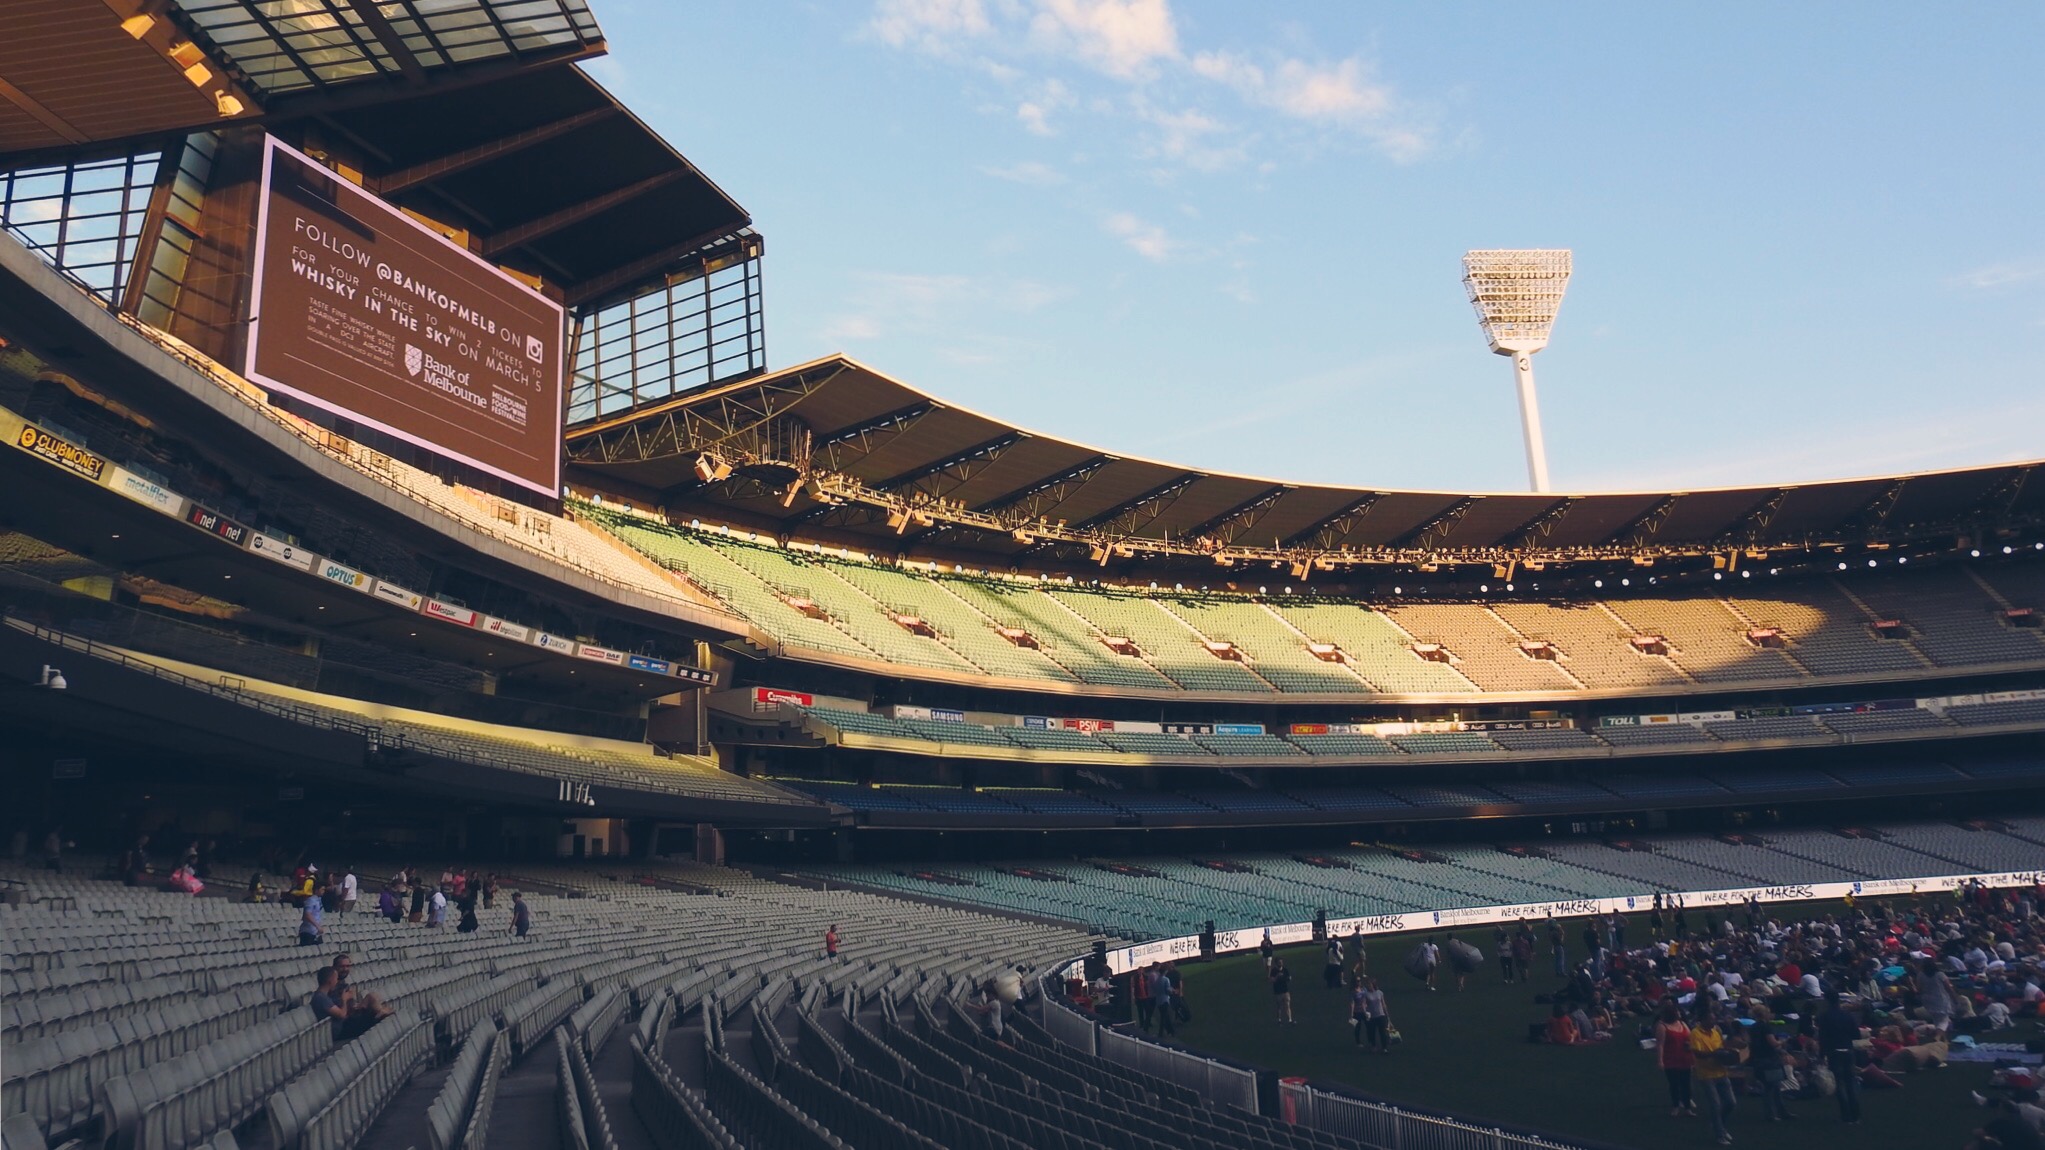 The MCG turns itself into an open air cinema for Cinema at the G